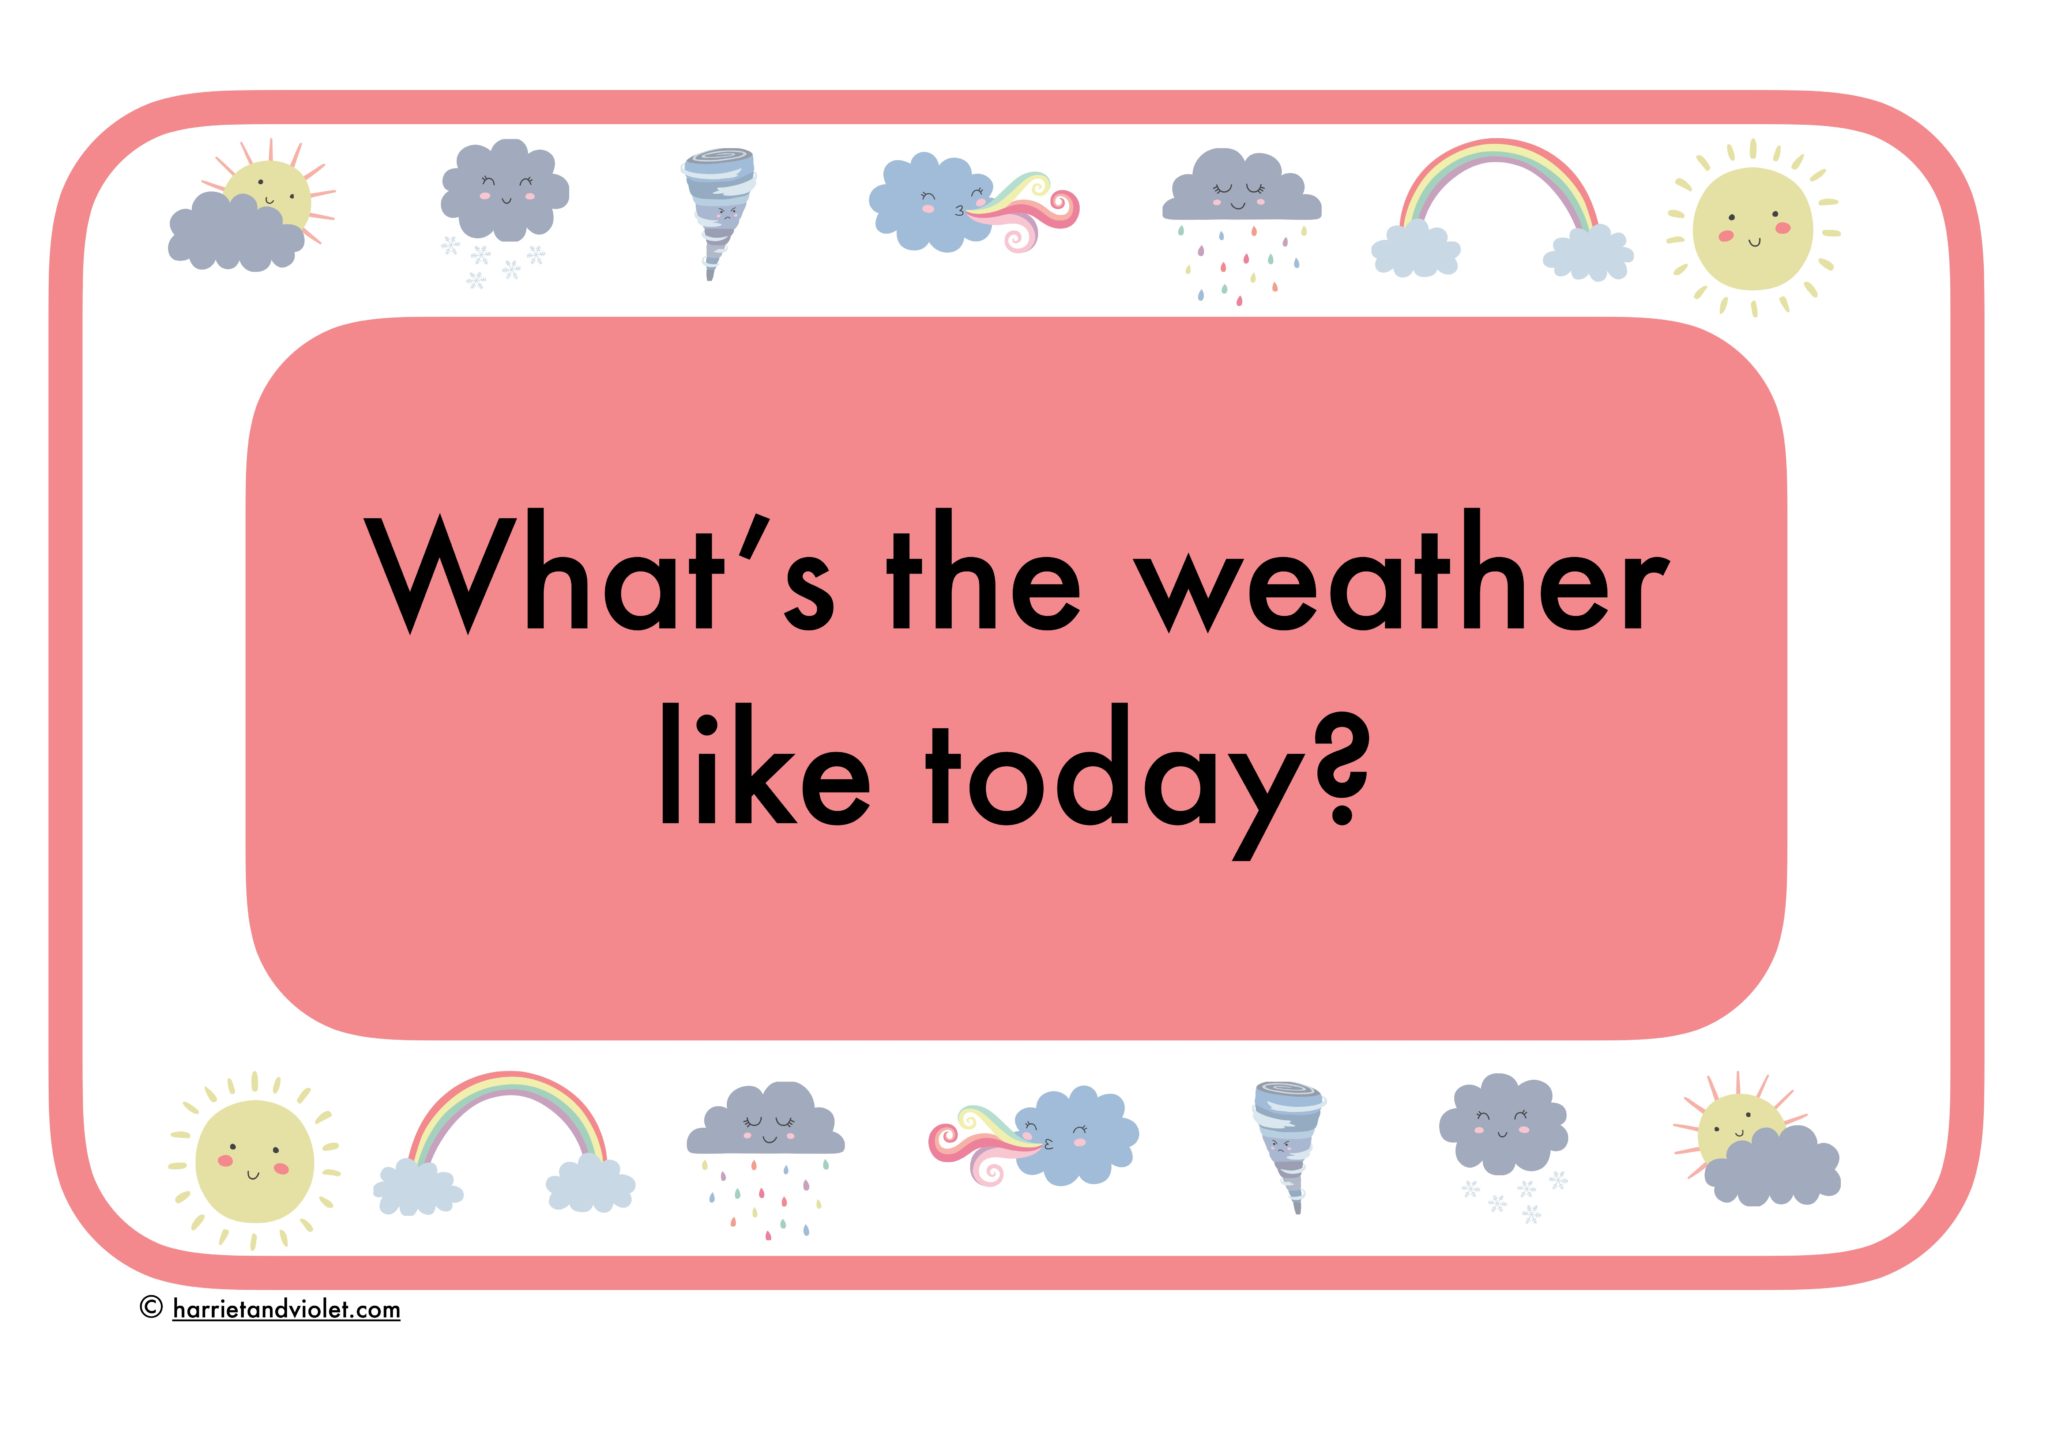 What s come her. What the weather like today. What`s the weather like. What is the weather today. What's the weather like today.